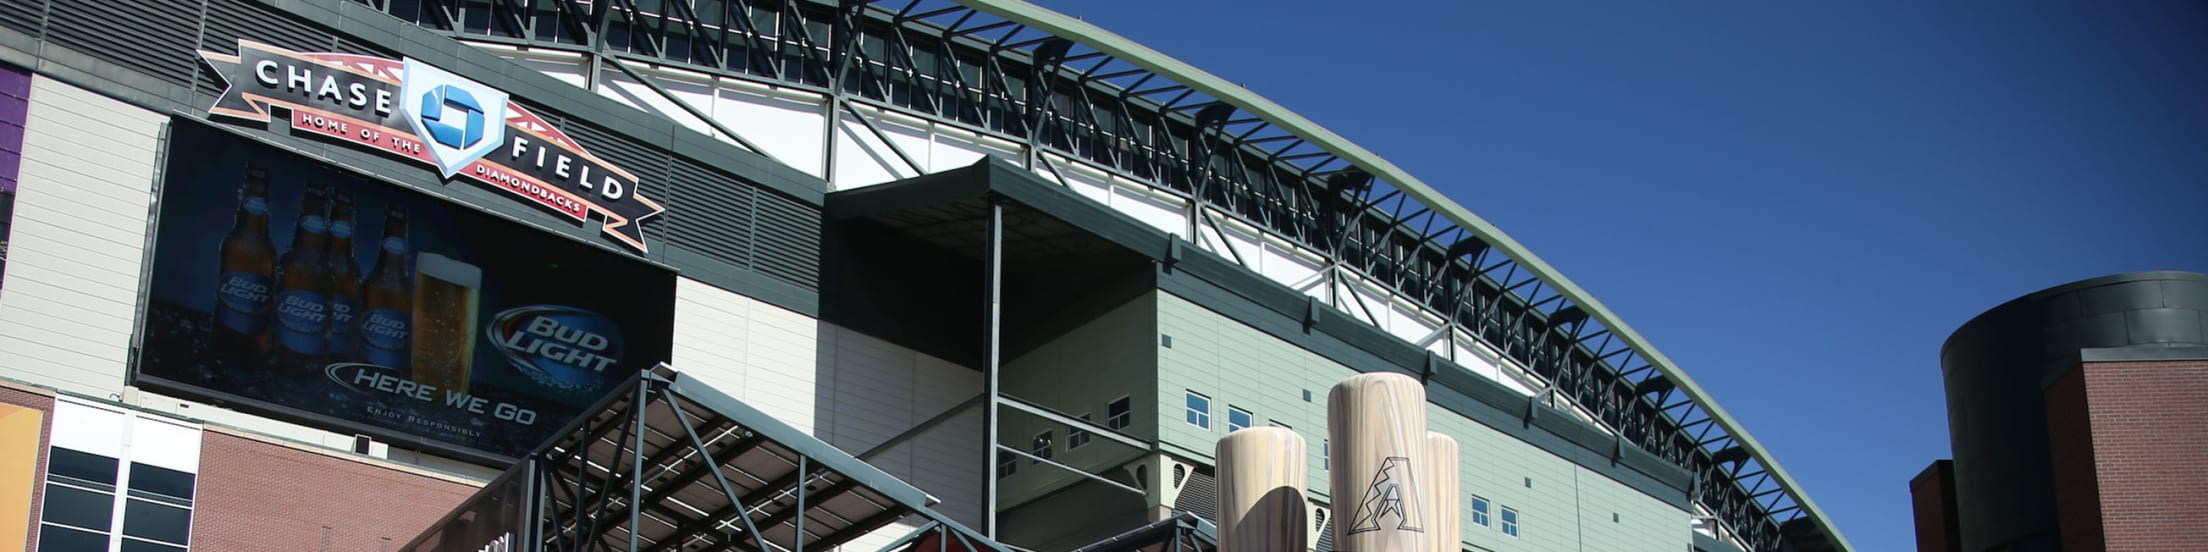 Chase Field Stadium: History, Capacity, Events & Significance